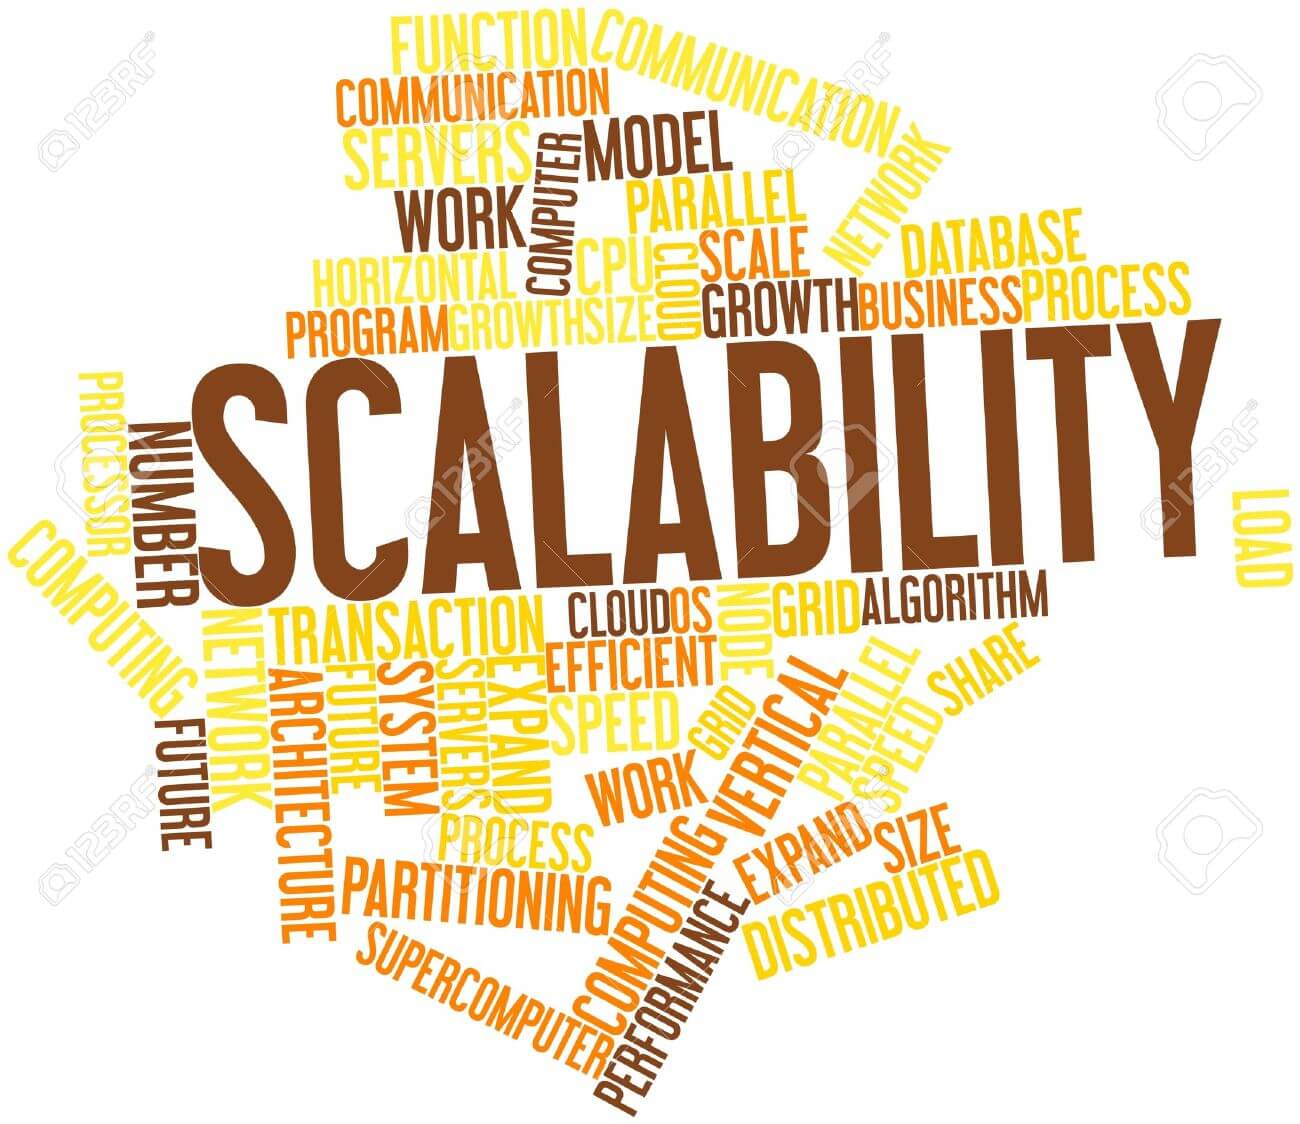 scalability - Technology Stack